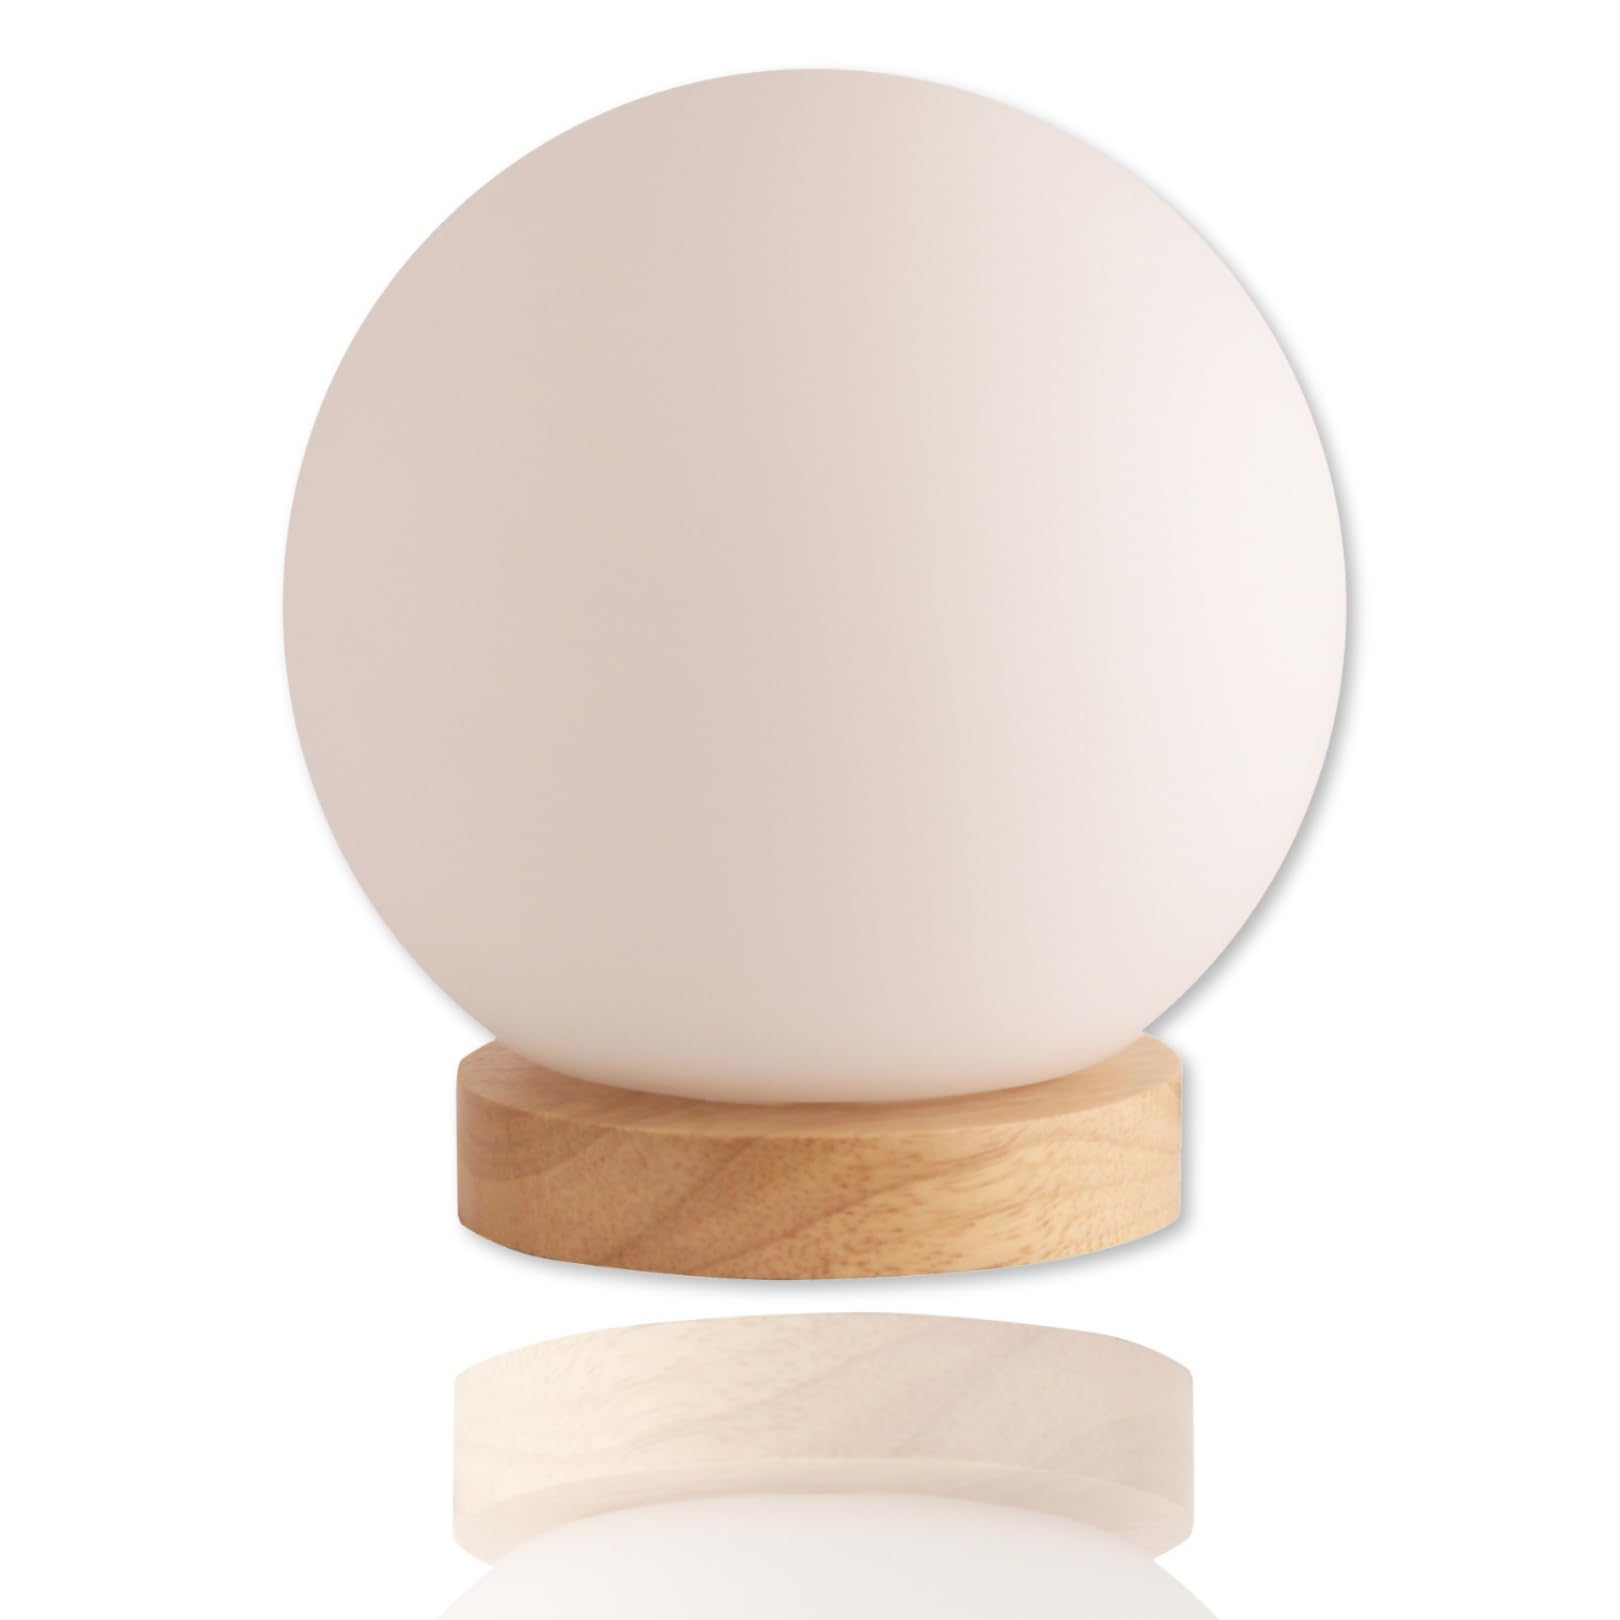 Globe Table Lamp with Included 6 Watt 550 Lumen 2700K LED Bulb - Sphere Lamp with Natural Wooden Base and Round Lamp Glass Shade - Ideal as Mini Table Lamp, Orb Light, Bookshelf Lamp Bedside Ball Lamp